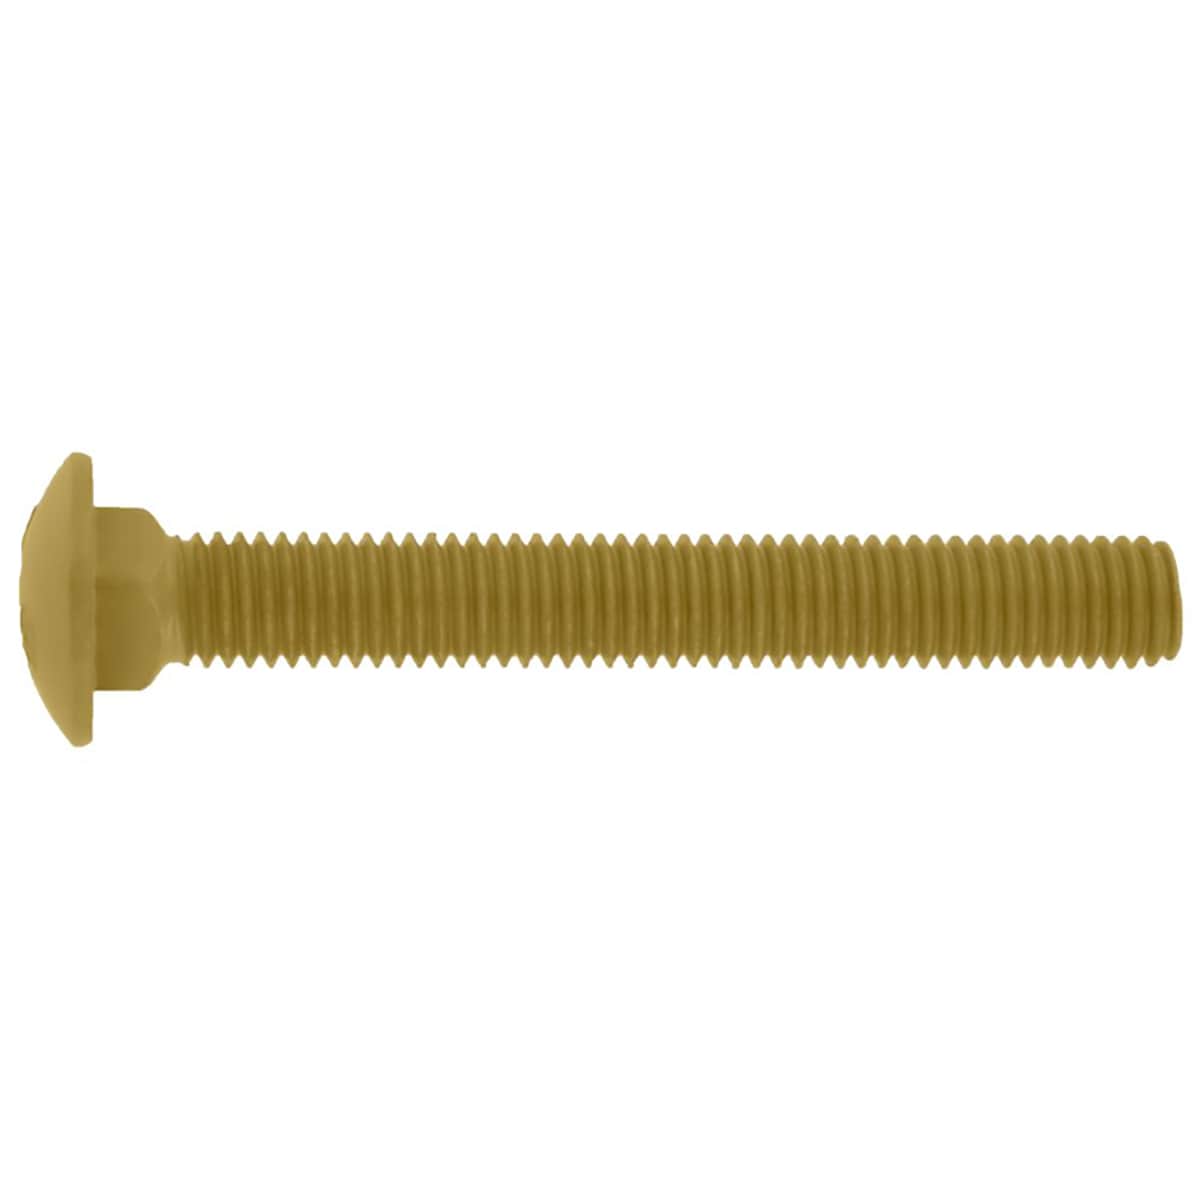 Miniature Hex Head Screws, Nuts, and Washers Set - Copper